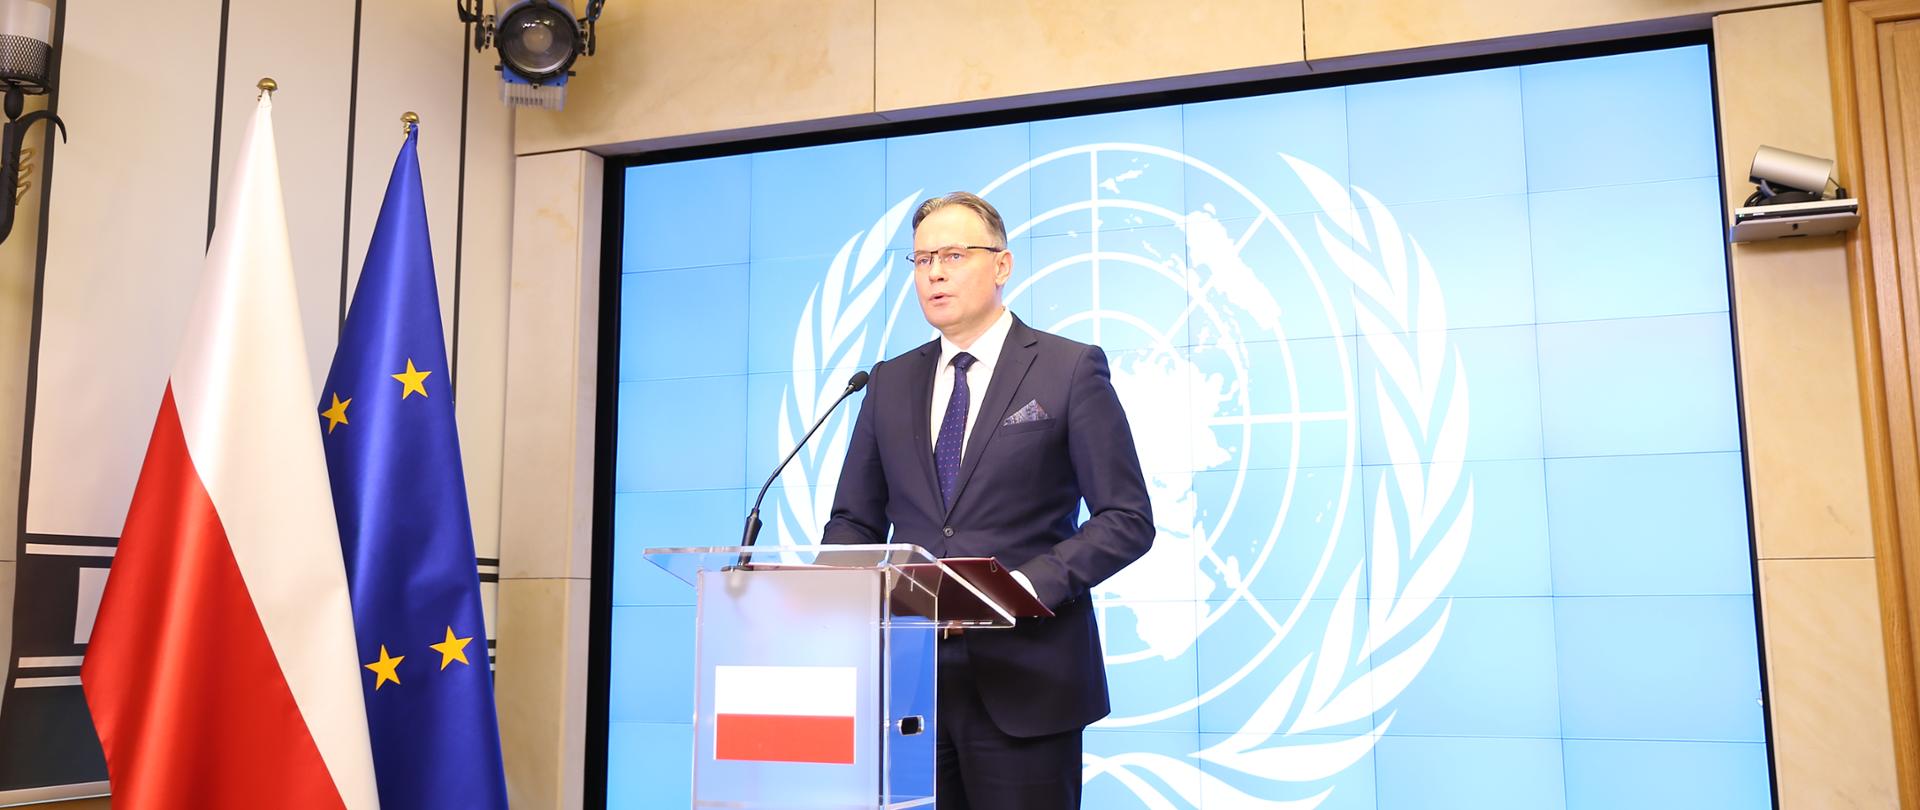 Poland requests UN to back its compensation claims for losses caused by German aggression and occupation in 1939-45